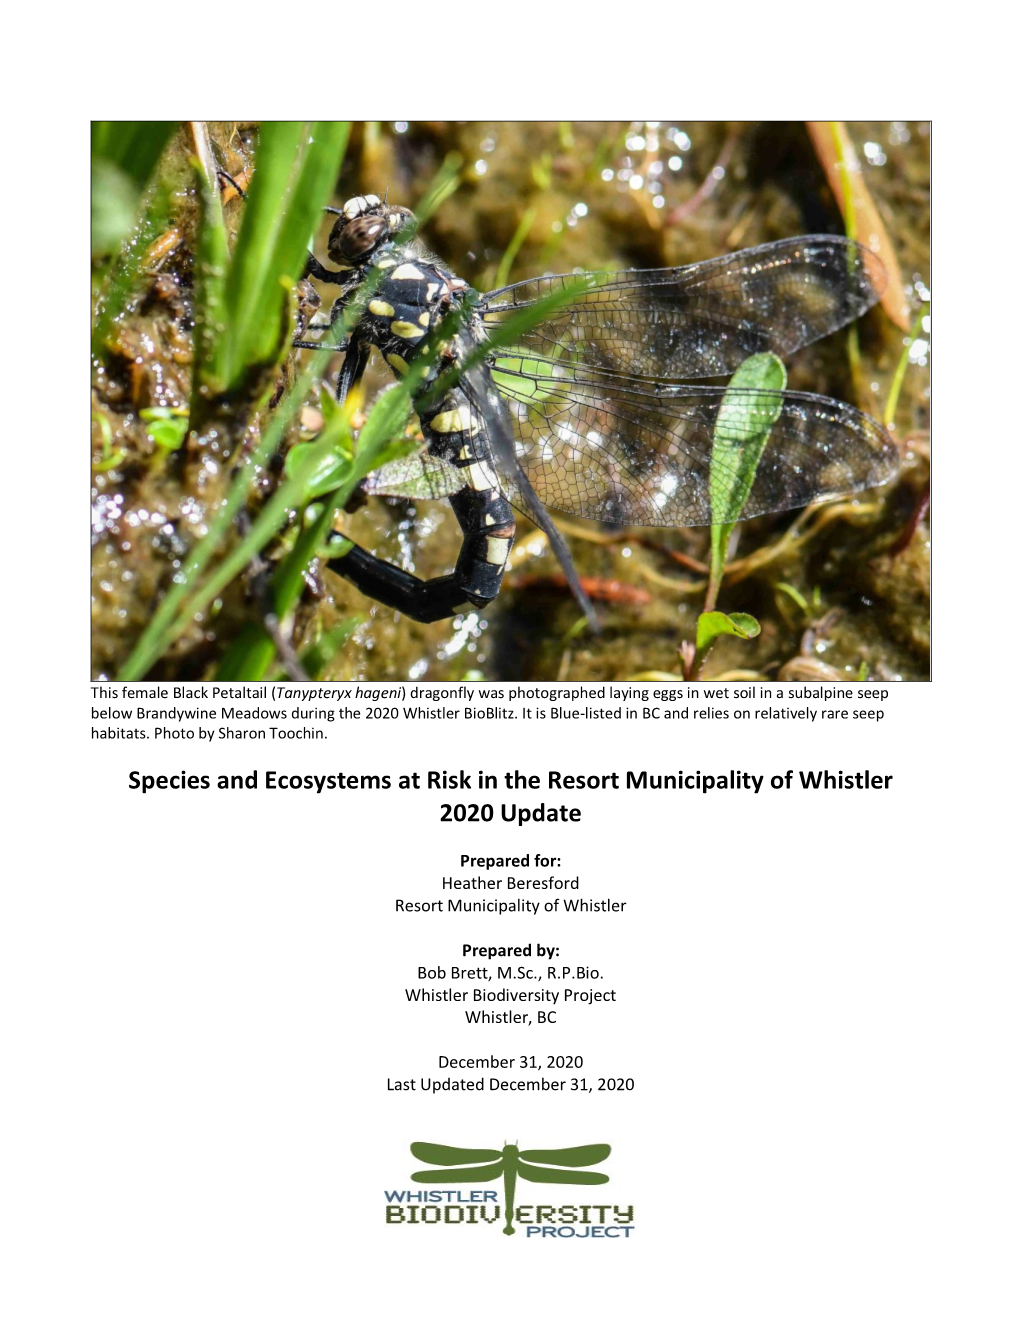 Species and Ecosystems at Risk in the Resort Municipality of Whistler 2020 Update